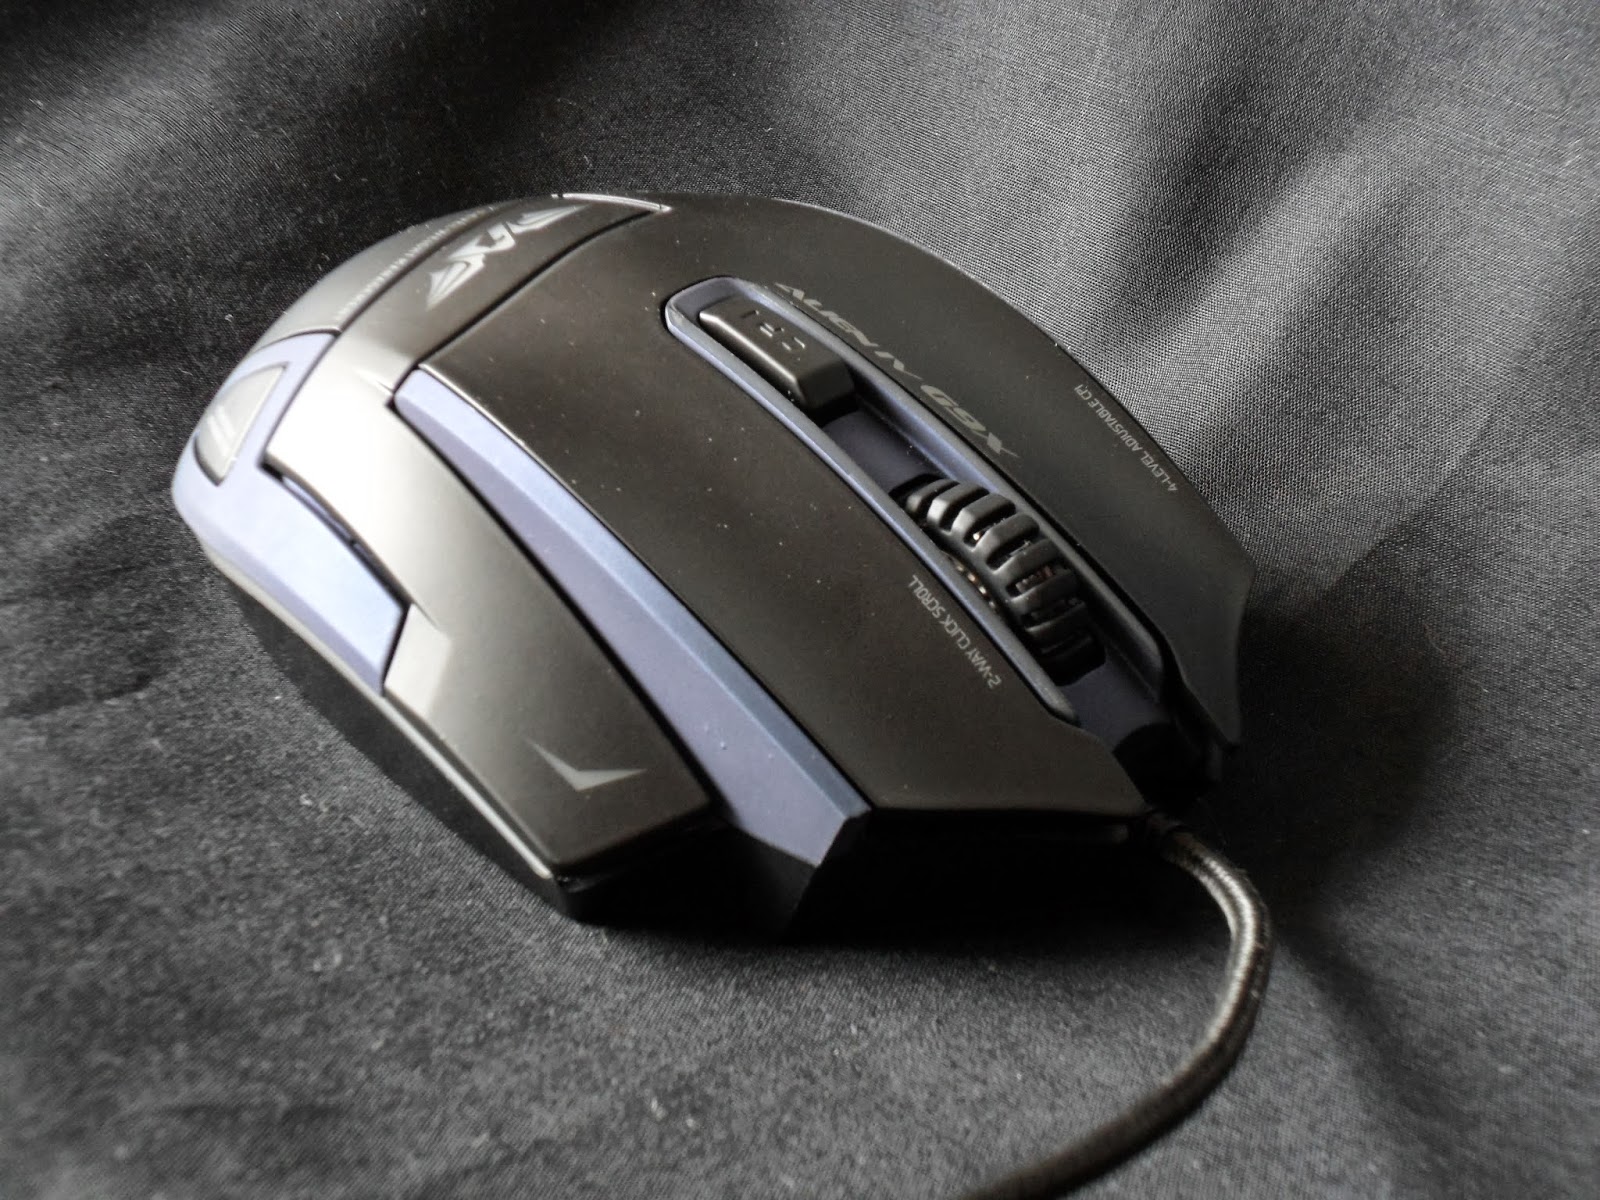 First Look & Review - Armaggeddon Alien IV G9X Optical Gaming Mouse 6